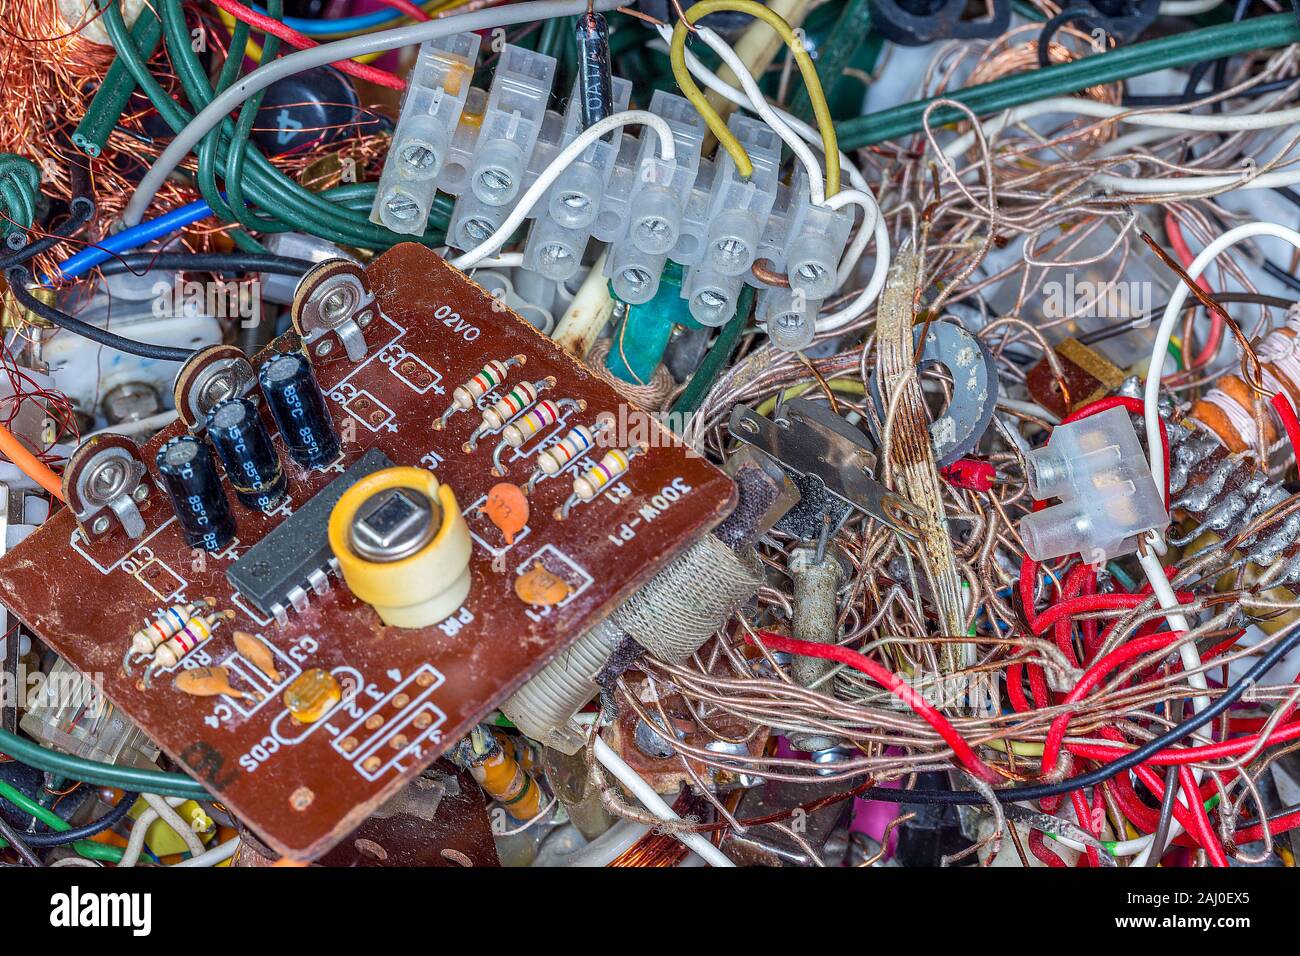 colored electronic waste Stock Photo